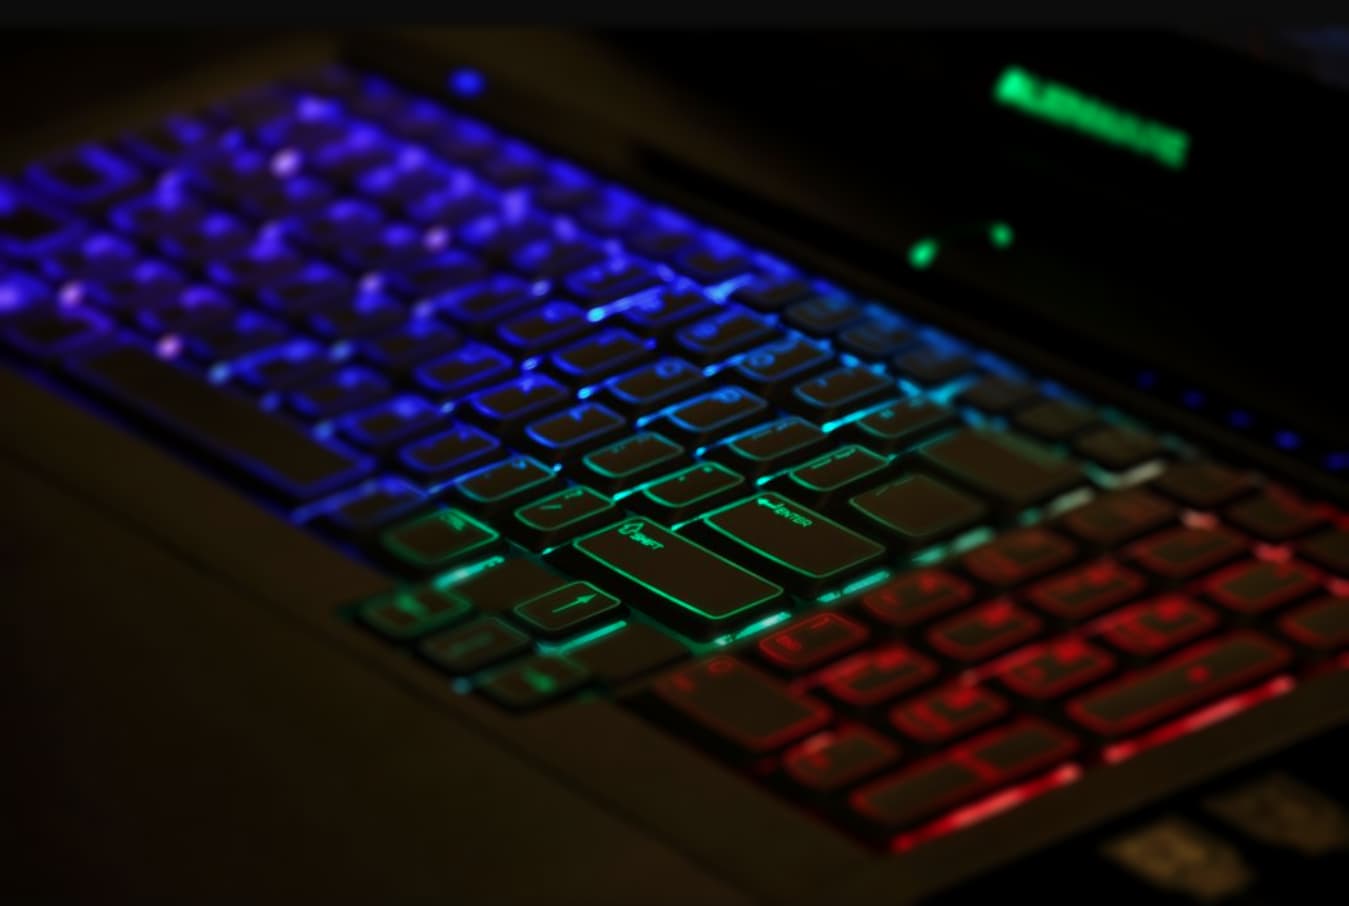 Ways To Stay Safe While Having Fun With Your Gaming Laptop